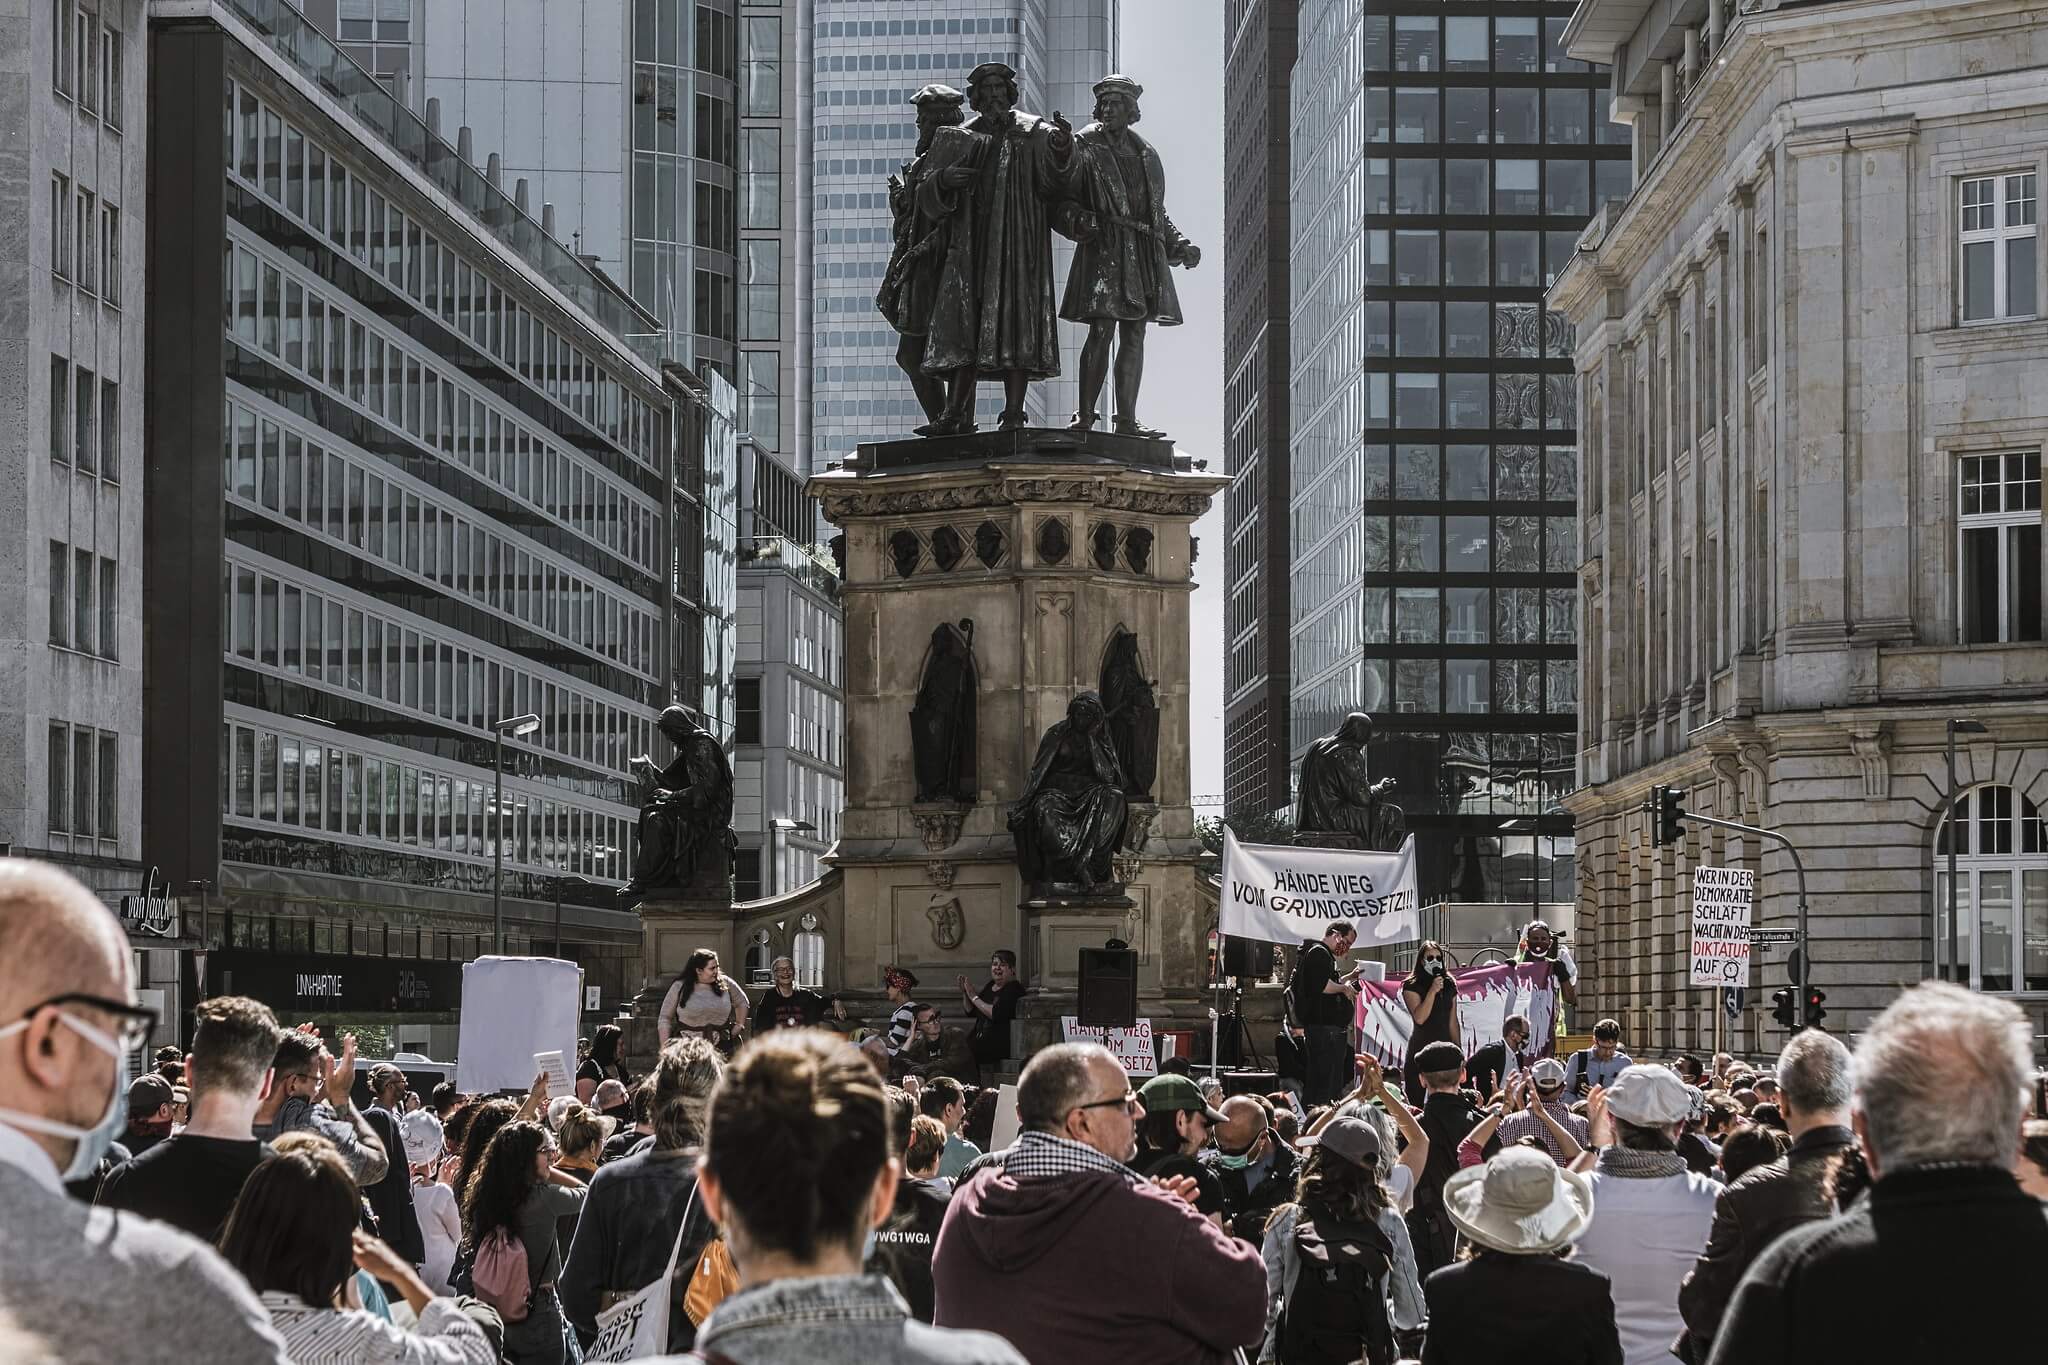 Thunder - Protest against corona measures in Frankfurt, Germany in May 2020. 7CO - Flickr